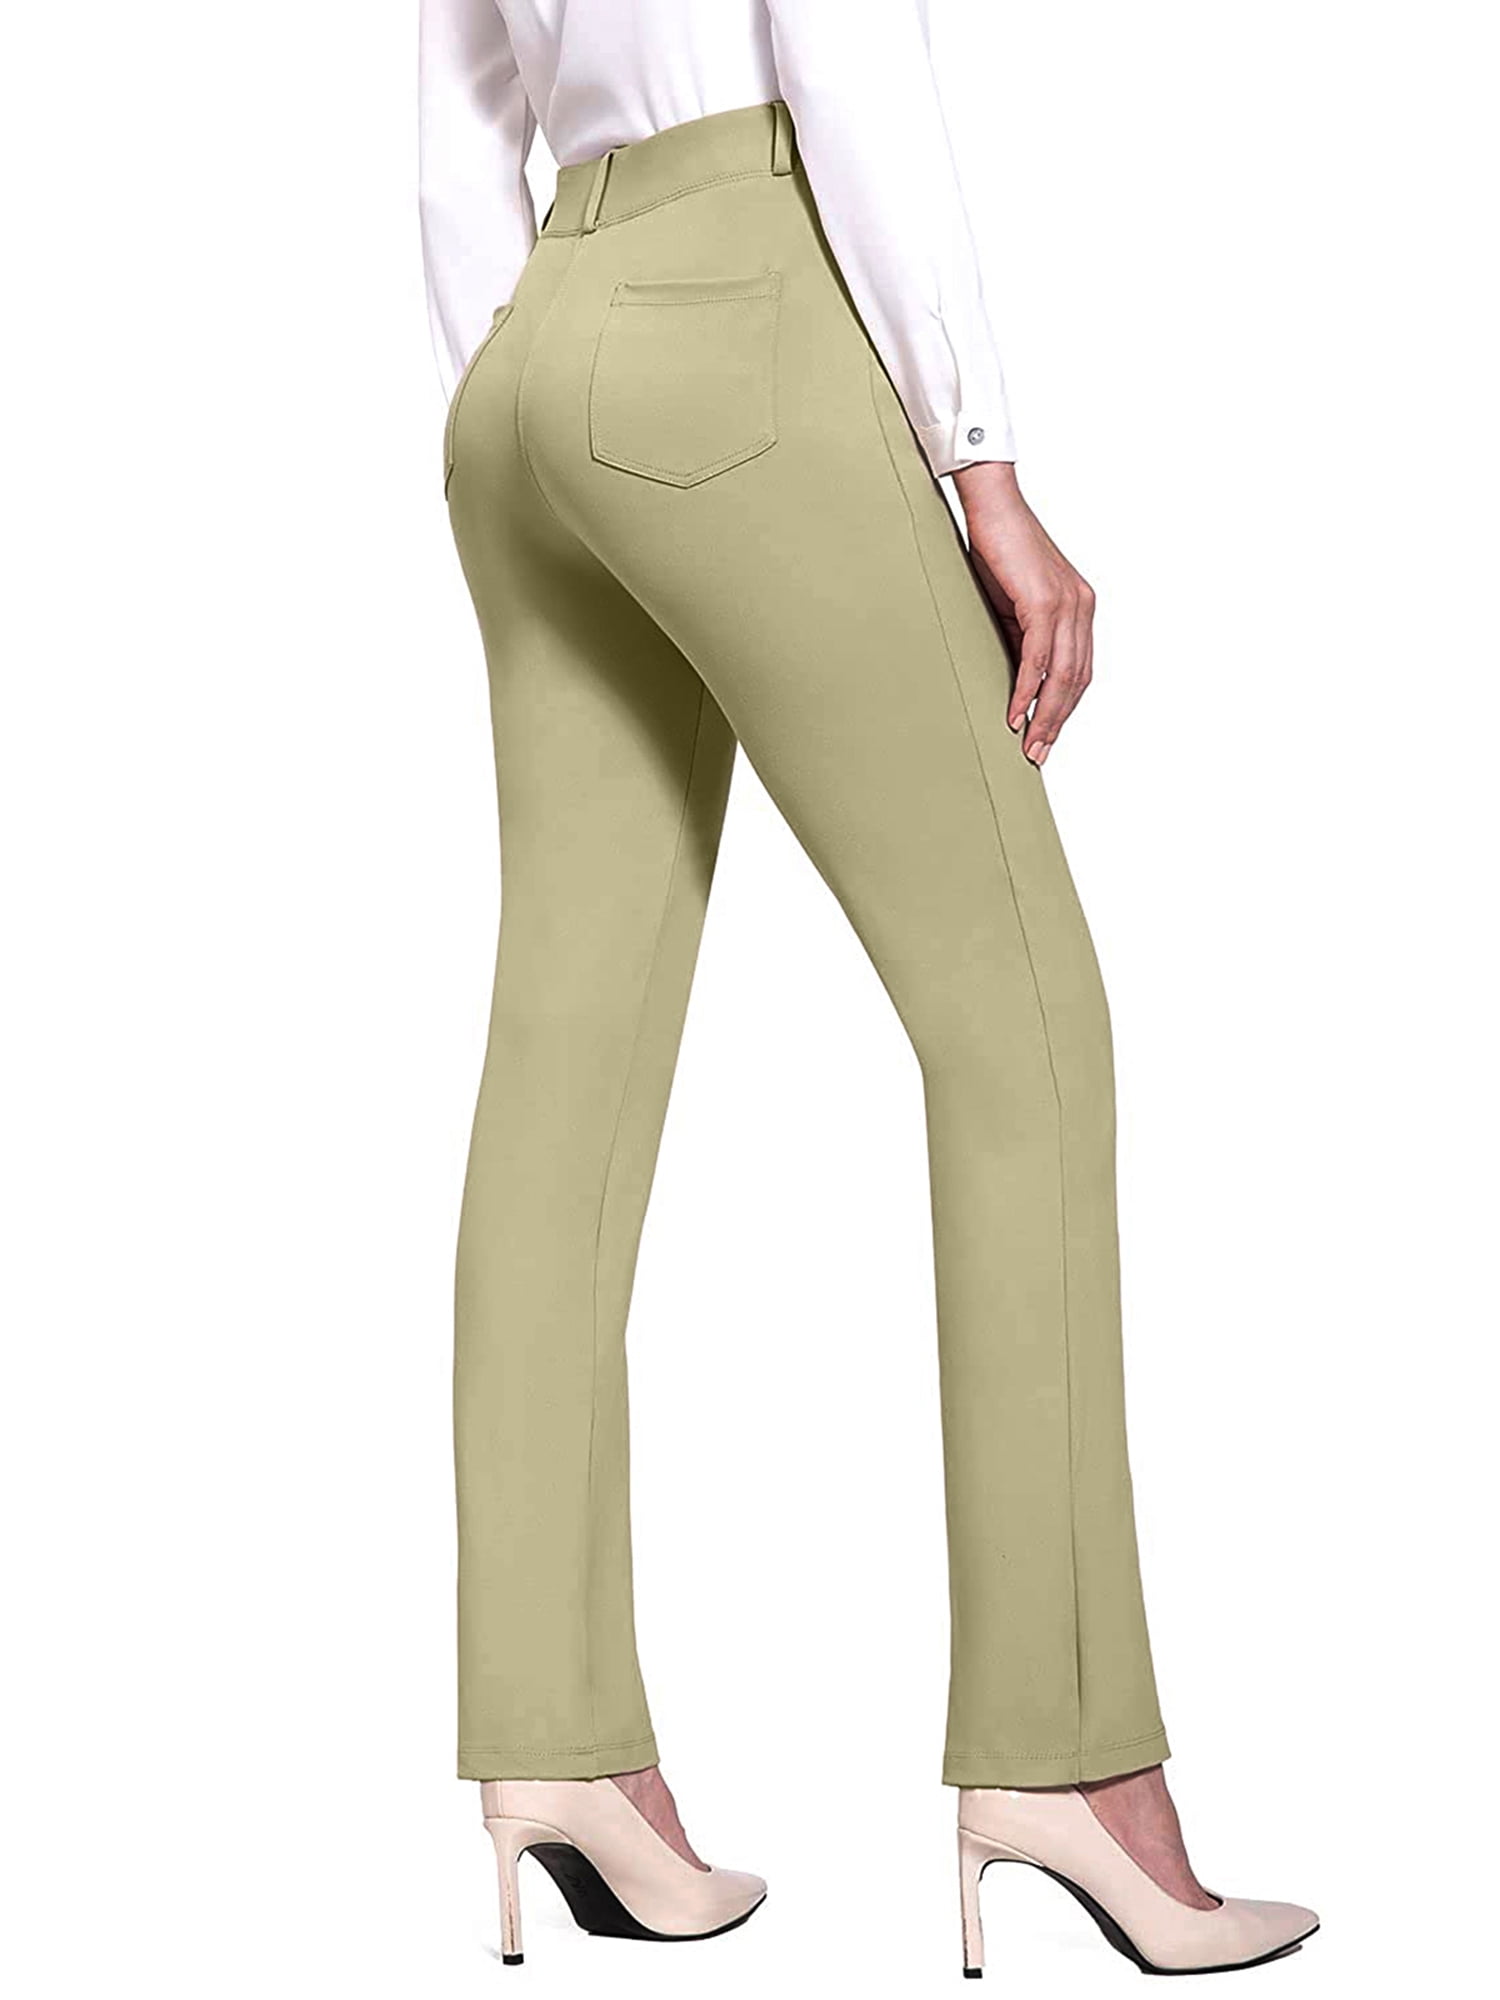 Women's Flare Pants Simple Straight Trousers Elegant Office Lady